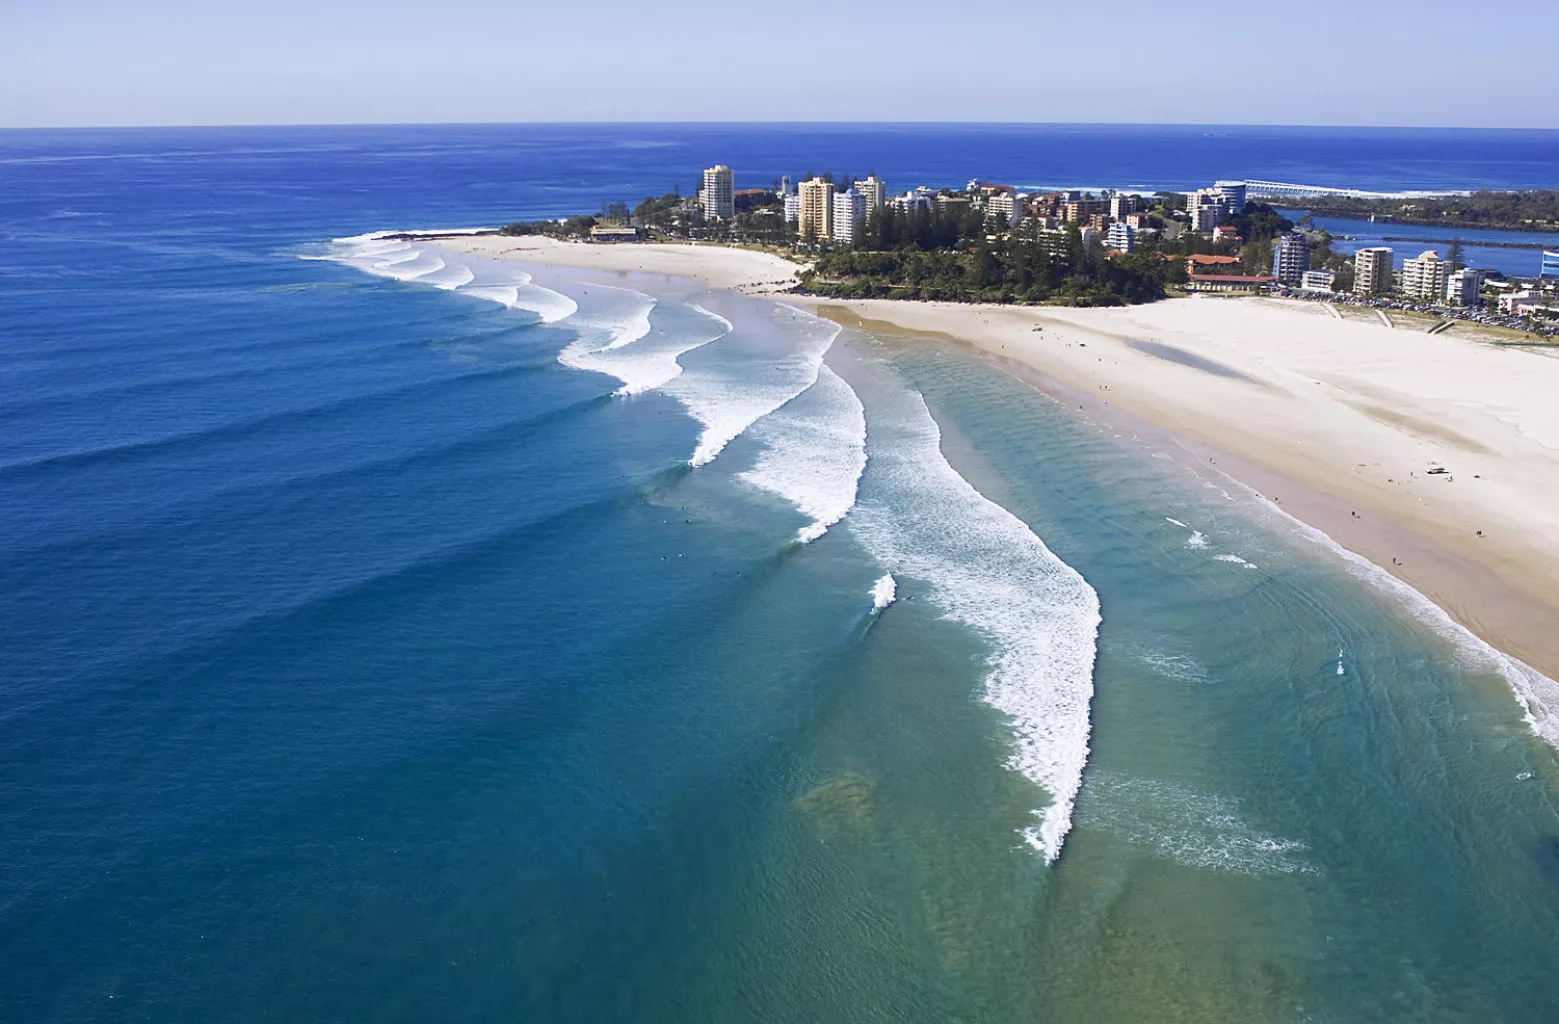 Snapper Rocks in Australia, Australia and Oceania | Surfing,Beaches - Rated 4.1